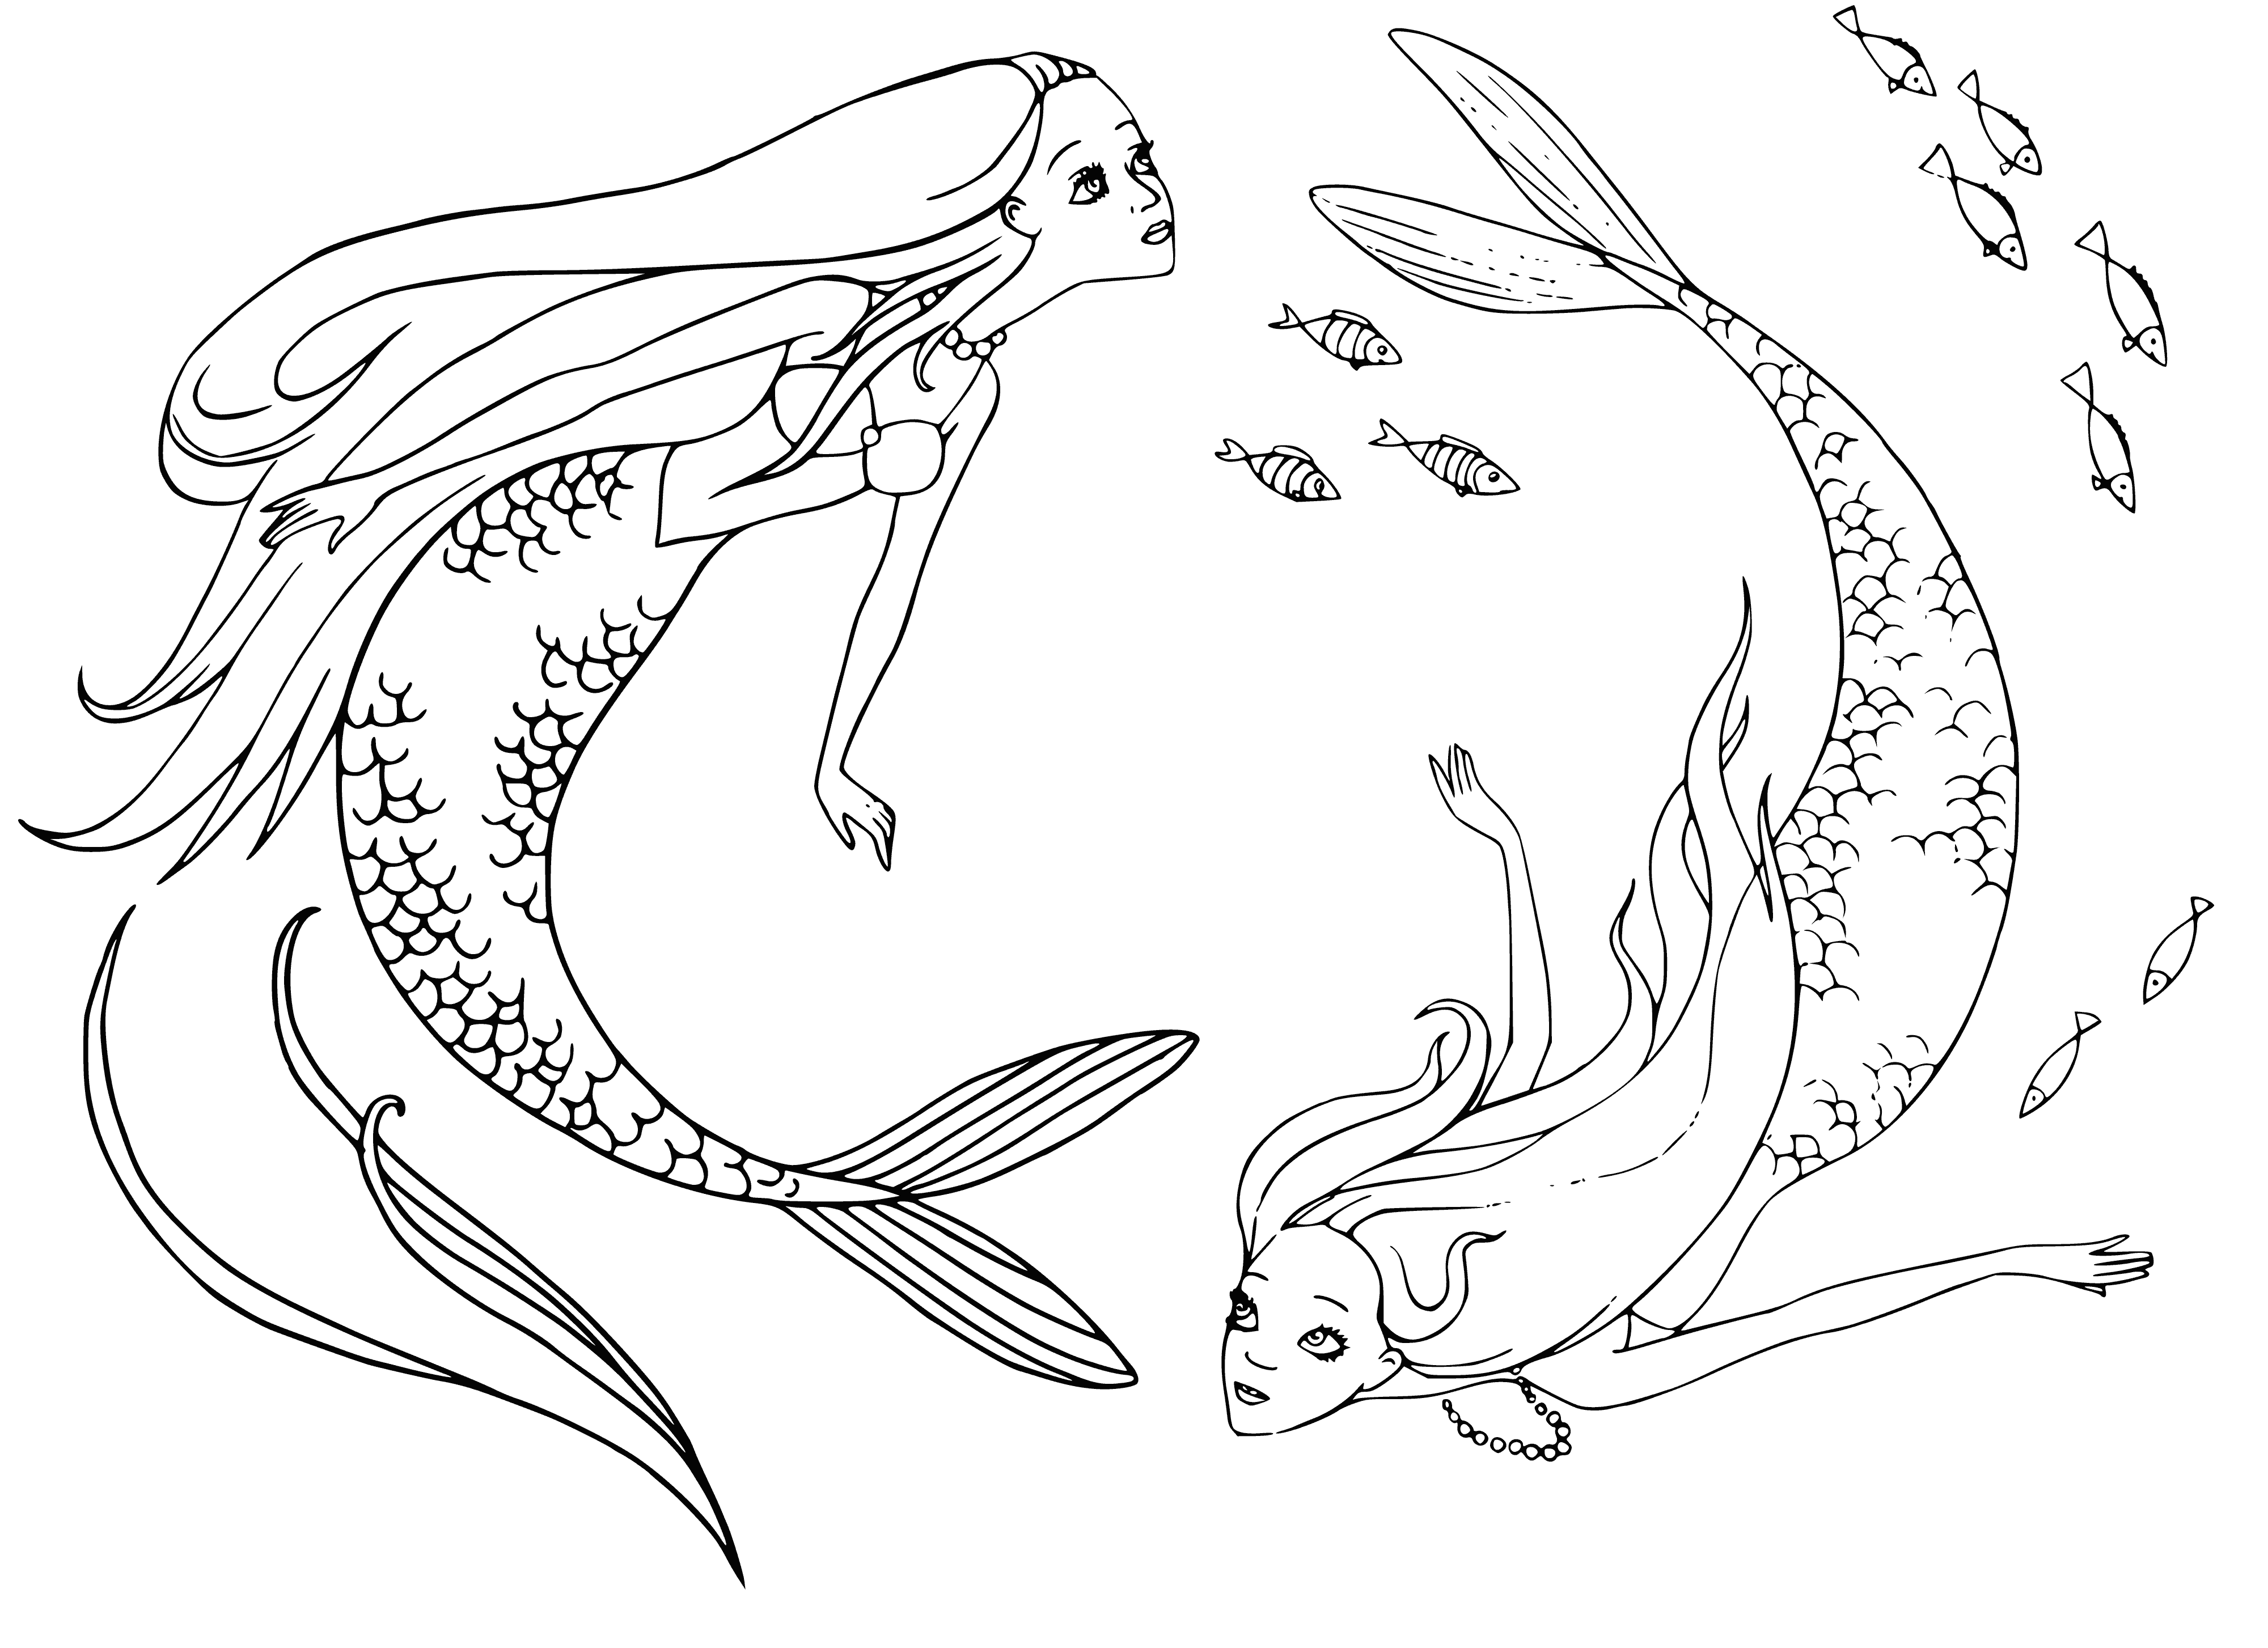 coloring page: Mystical merfolk creatures with human heads & arms, greenish-blue skins, necklace shells, and singing voices, living in a cove by the sea.